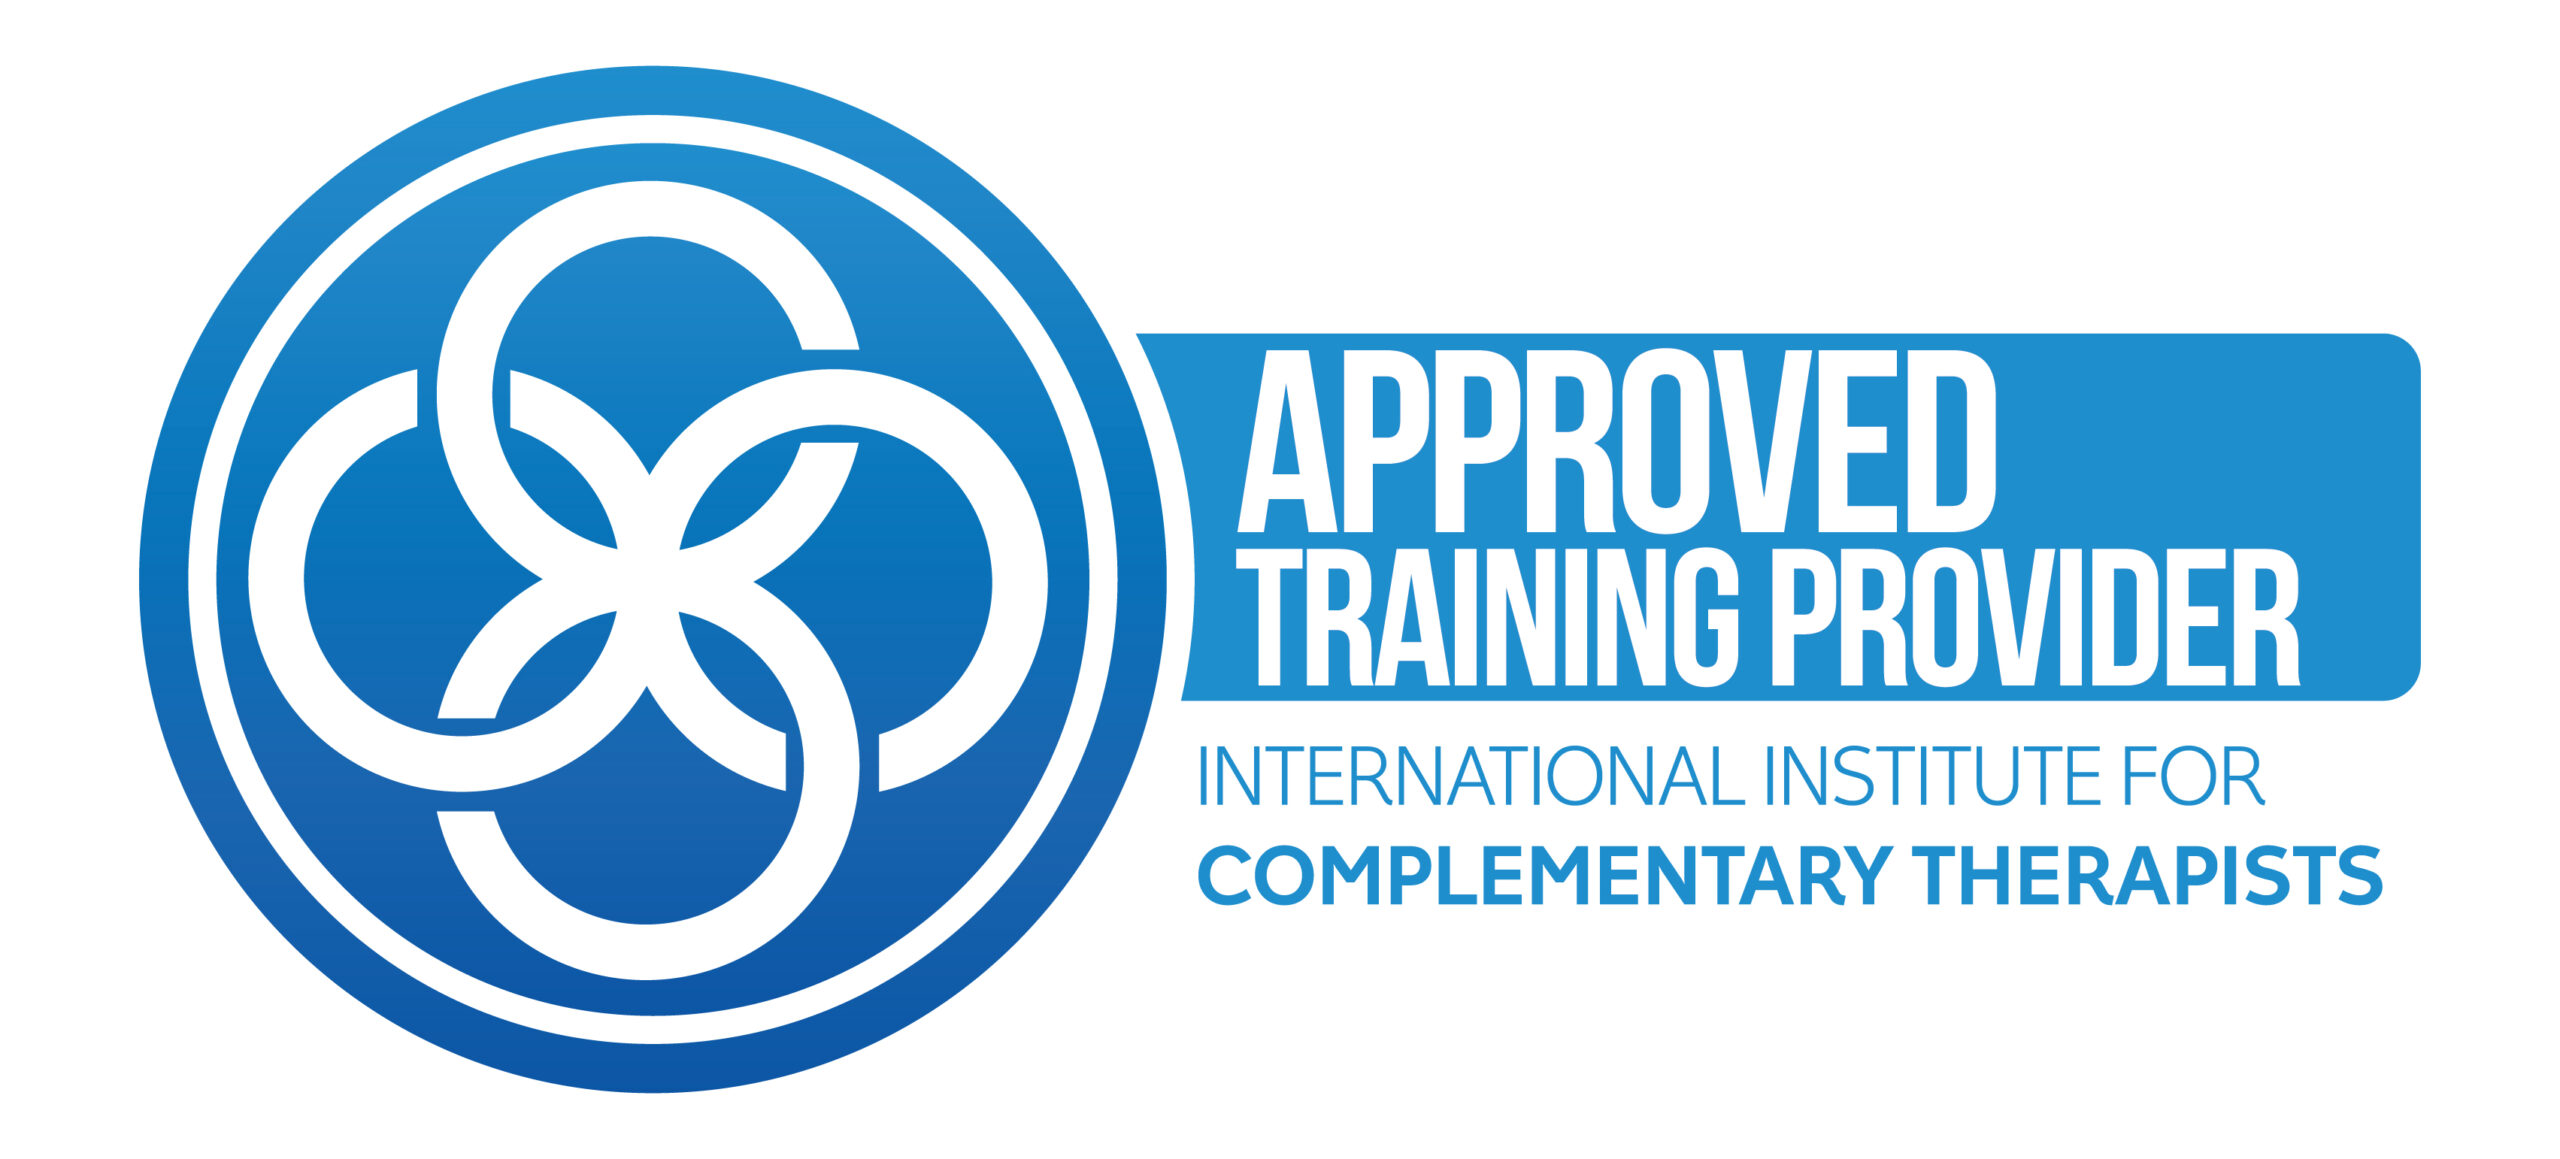 We're an approved training provider from the International Institute For Complementary Therapists